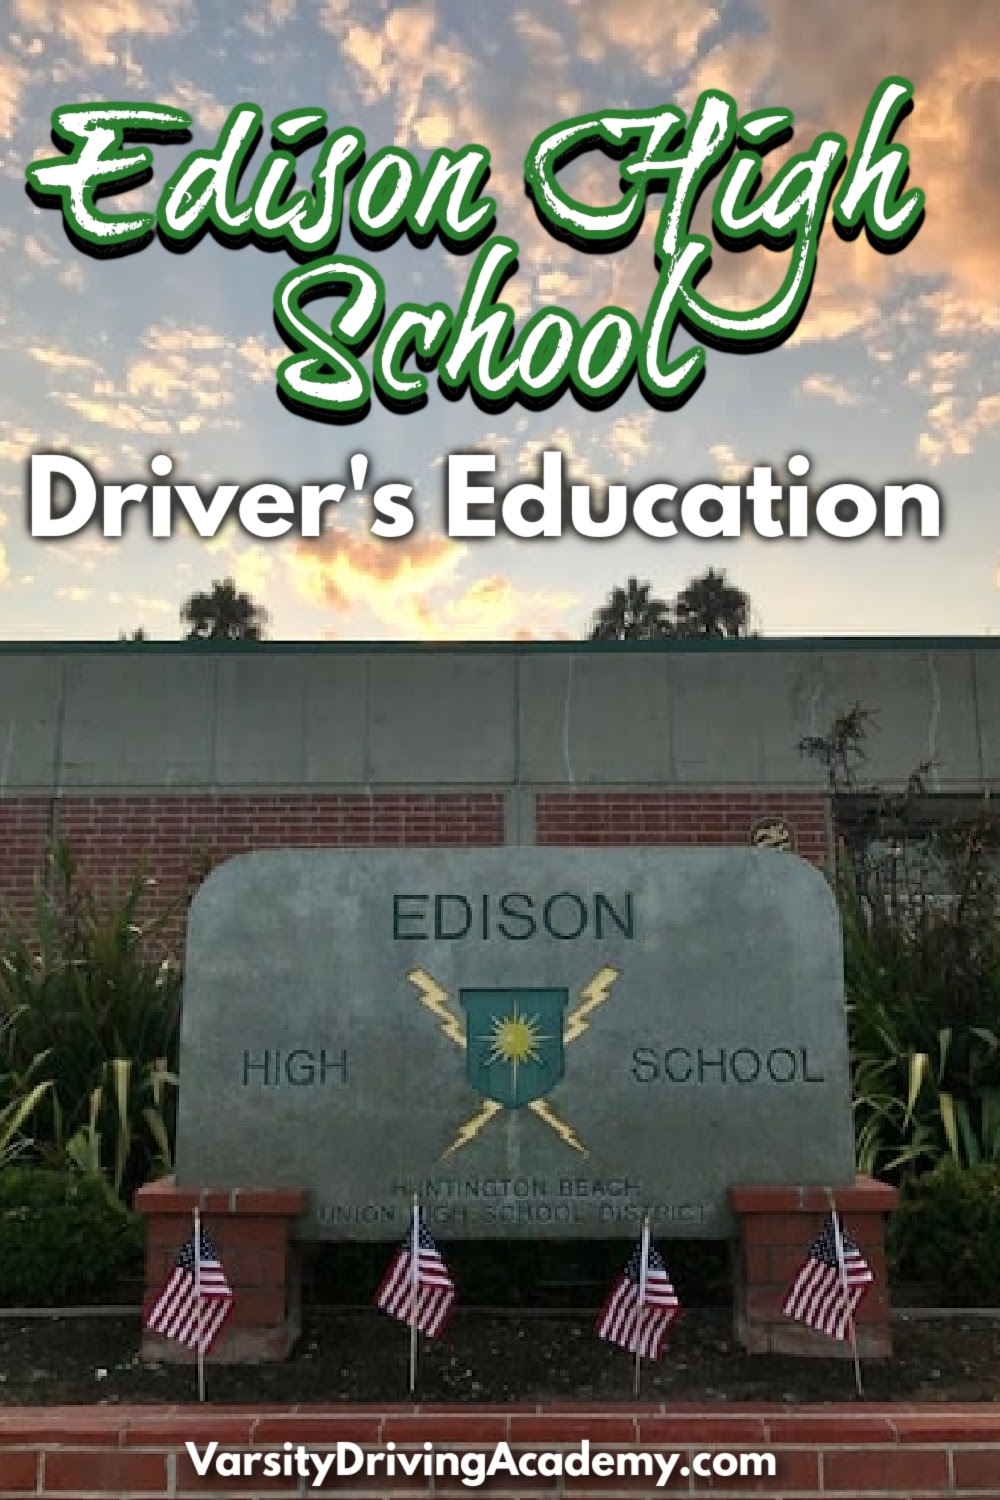 Varsity Driving Academy is the best Edison High School driver's education where students learn how to drive and how to drive safely.